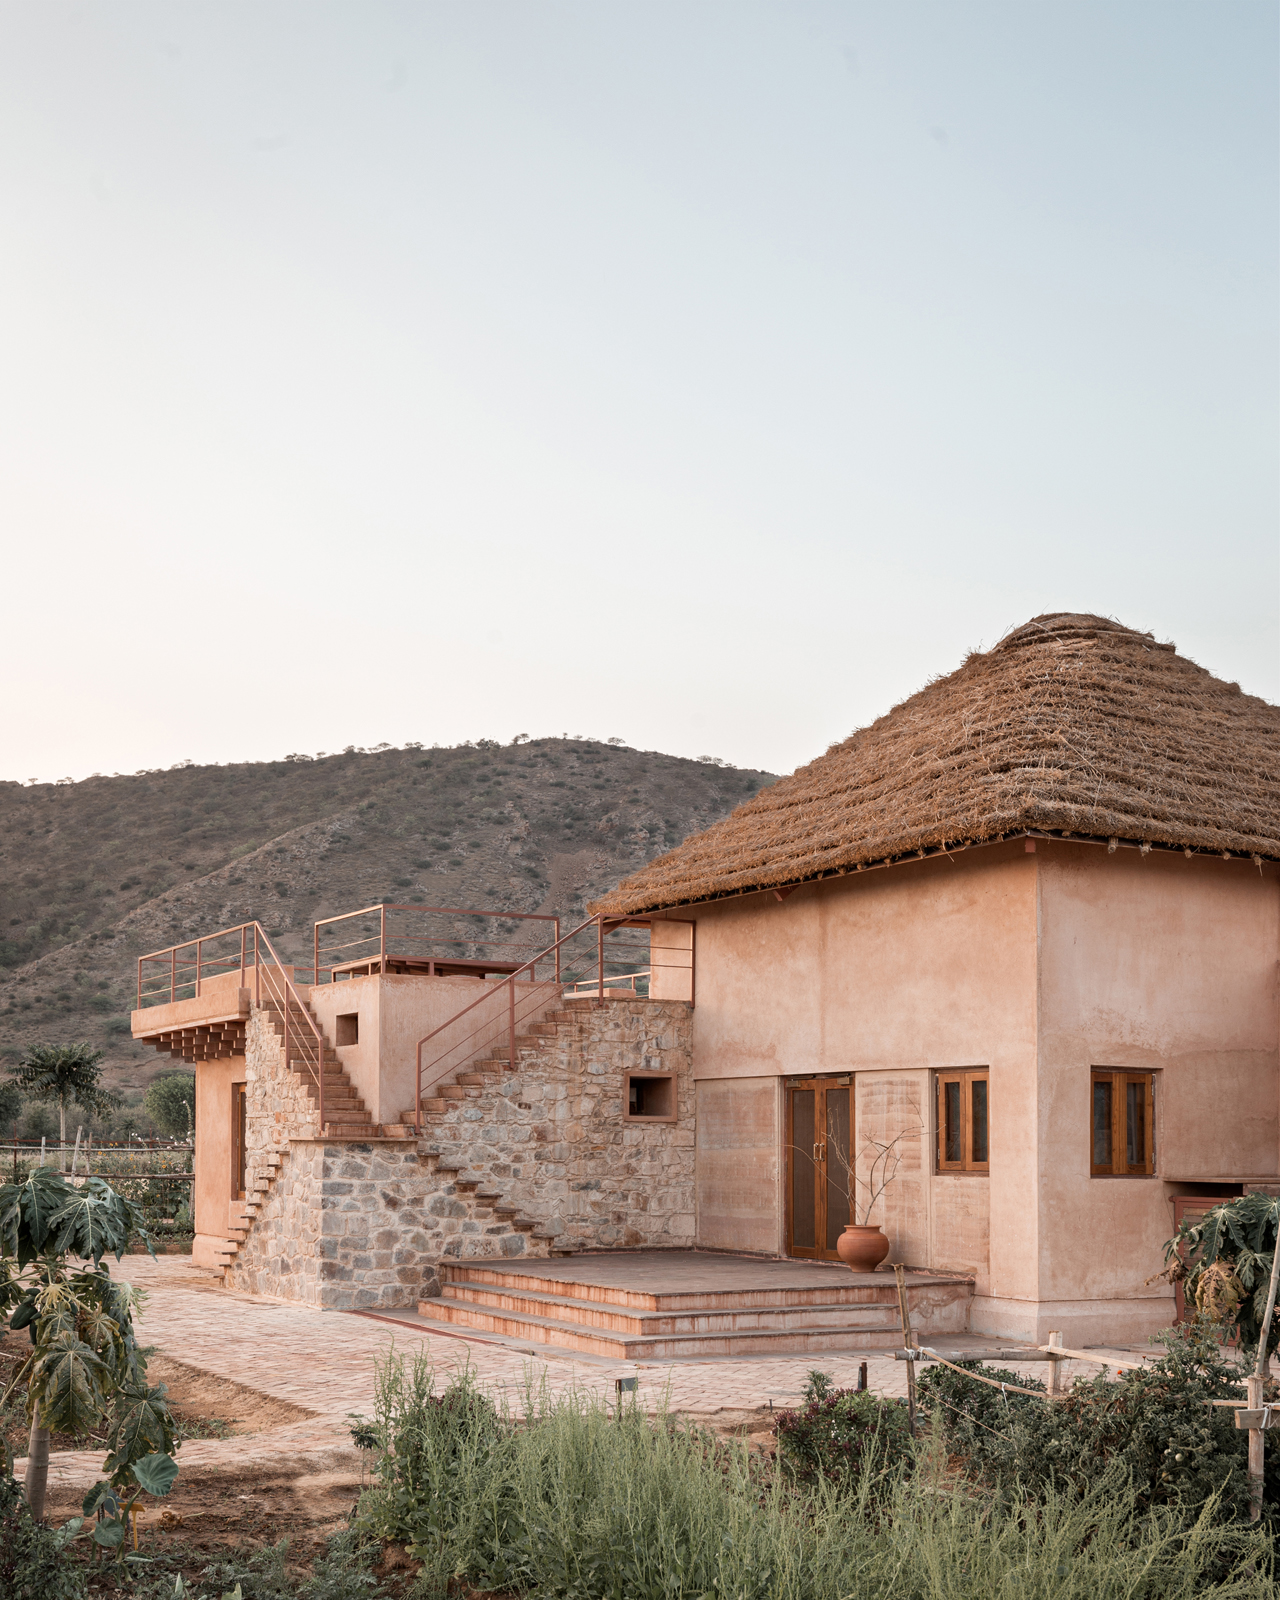 Mud House by Sketch Design Studio has a design inspired by the historic multi-story well in Rajasthan